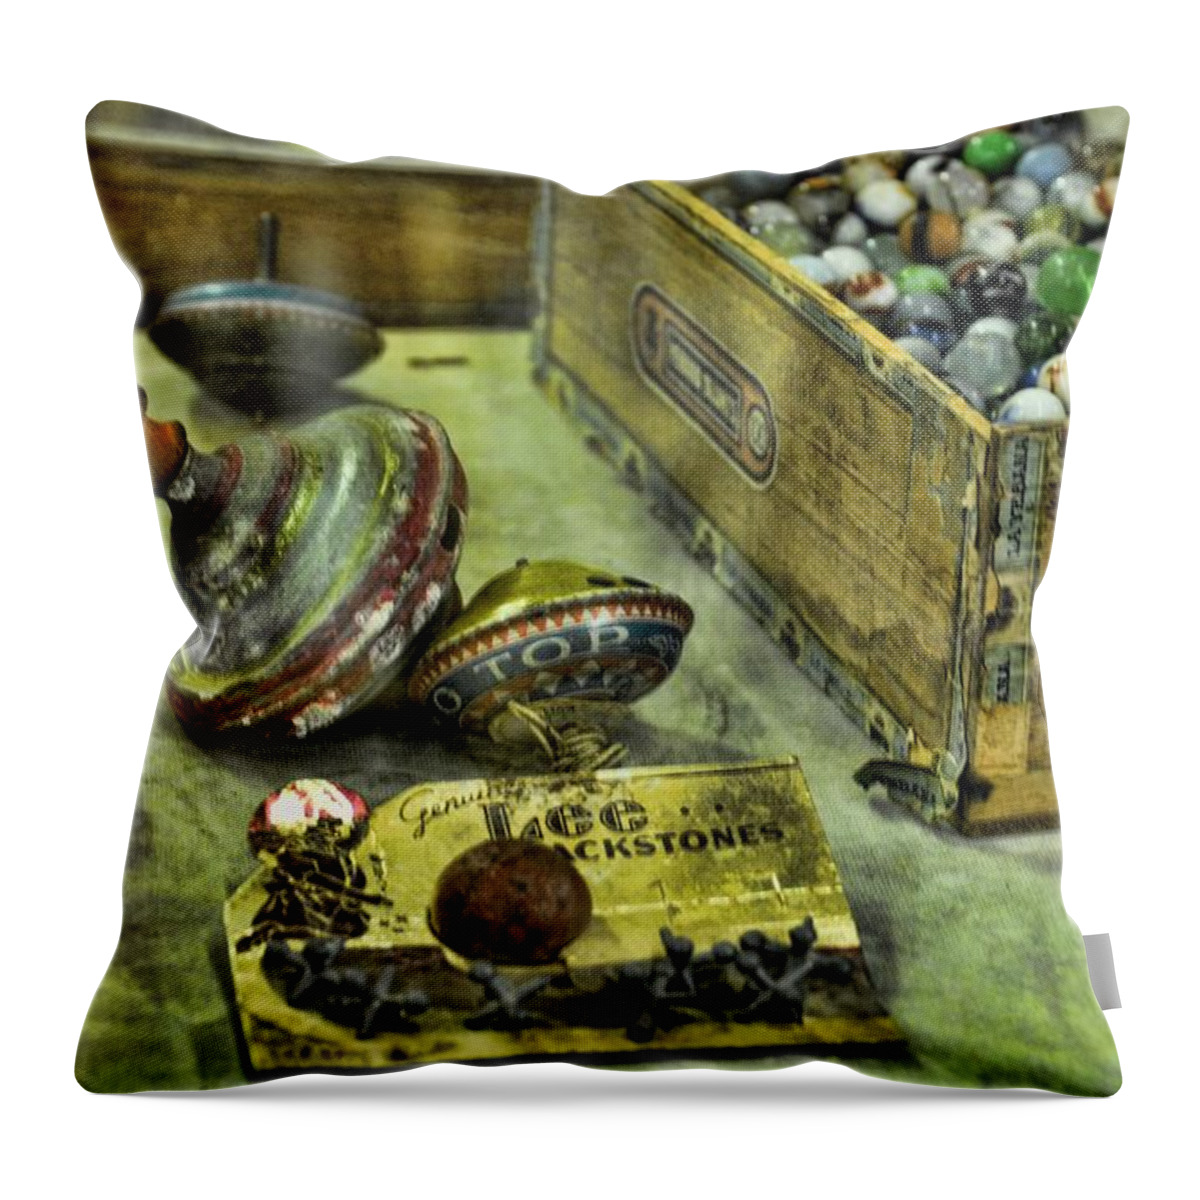 Still Life Throw Pillow featuring the photograph Yesterday's Toys by Jan Amiss Photography